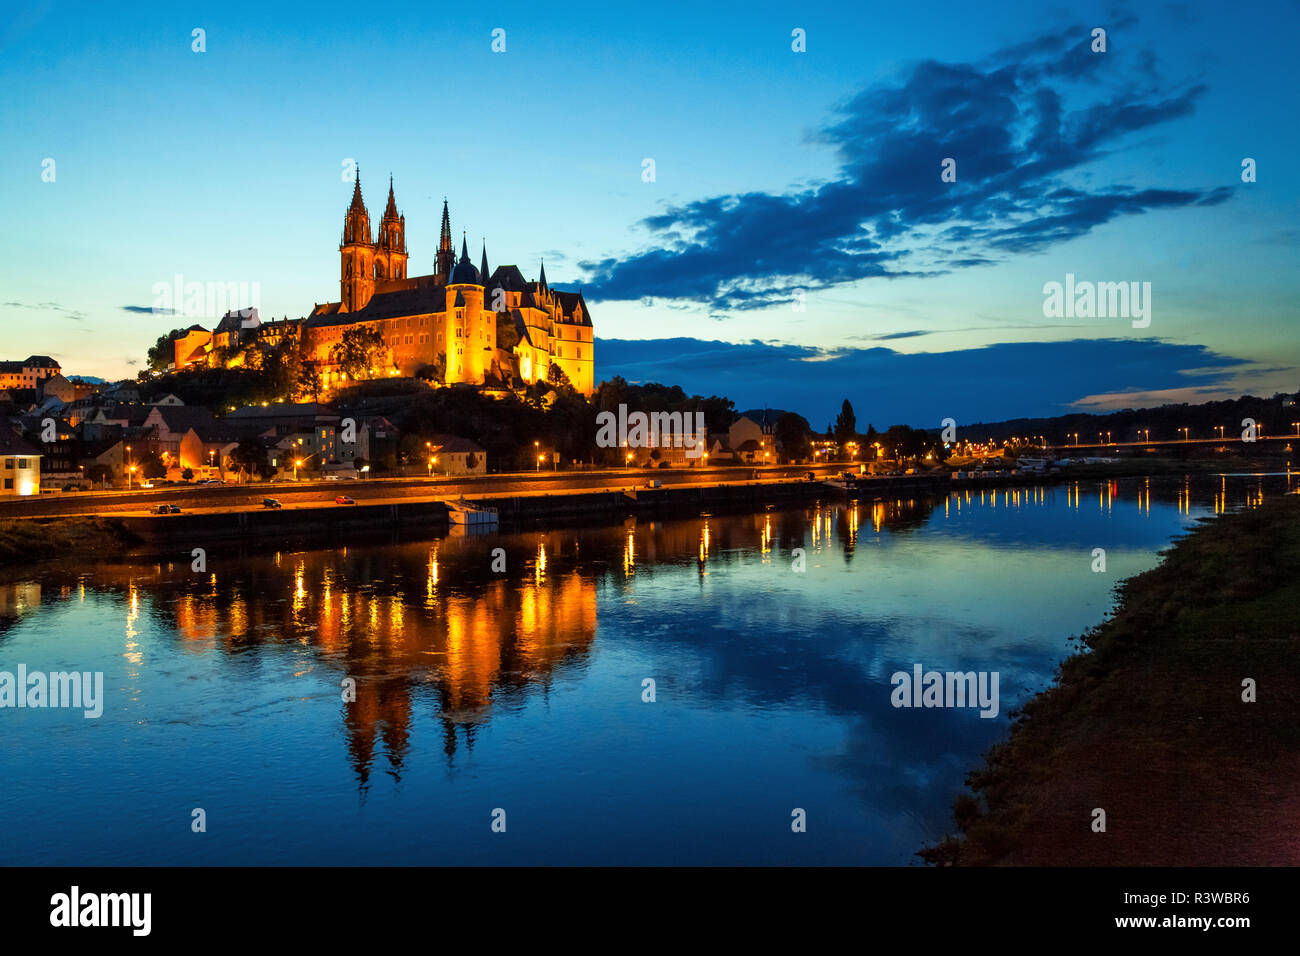 Germany, Meissen, view to lighted Albrechtsburg castle with Elbe River in the foreground Stock Photo